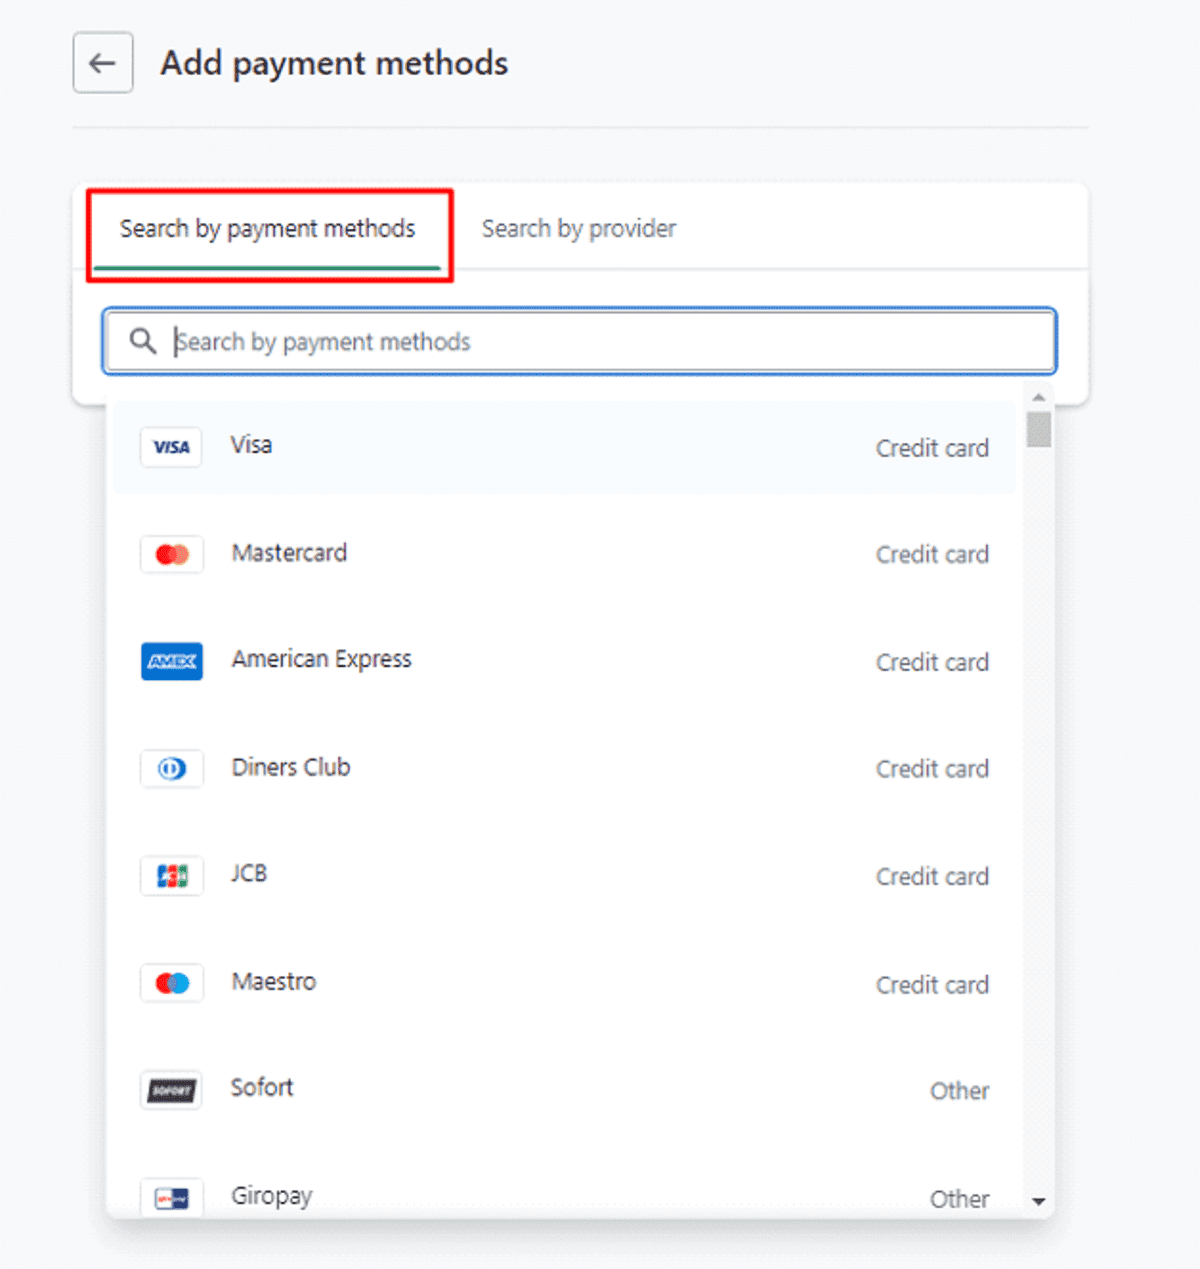 payment methods - how to add payment methods in Shopify